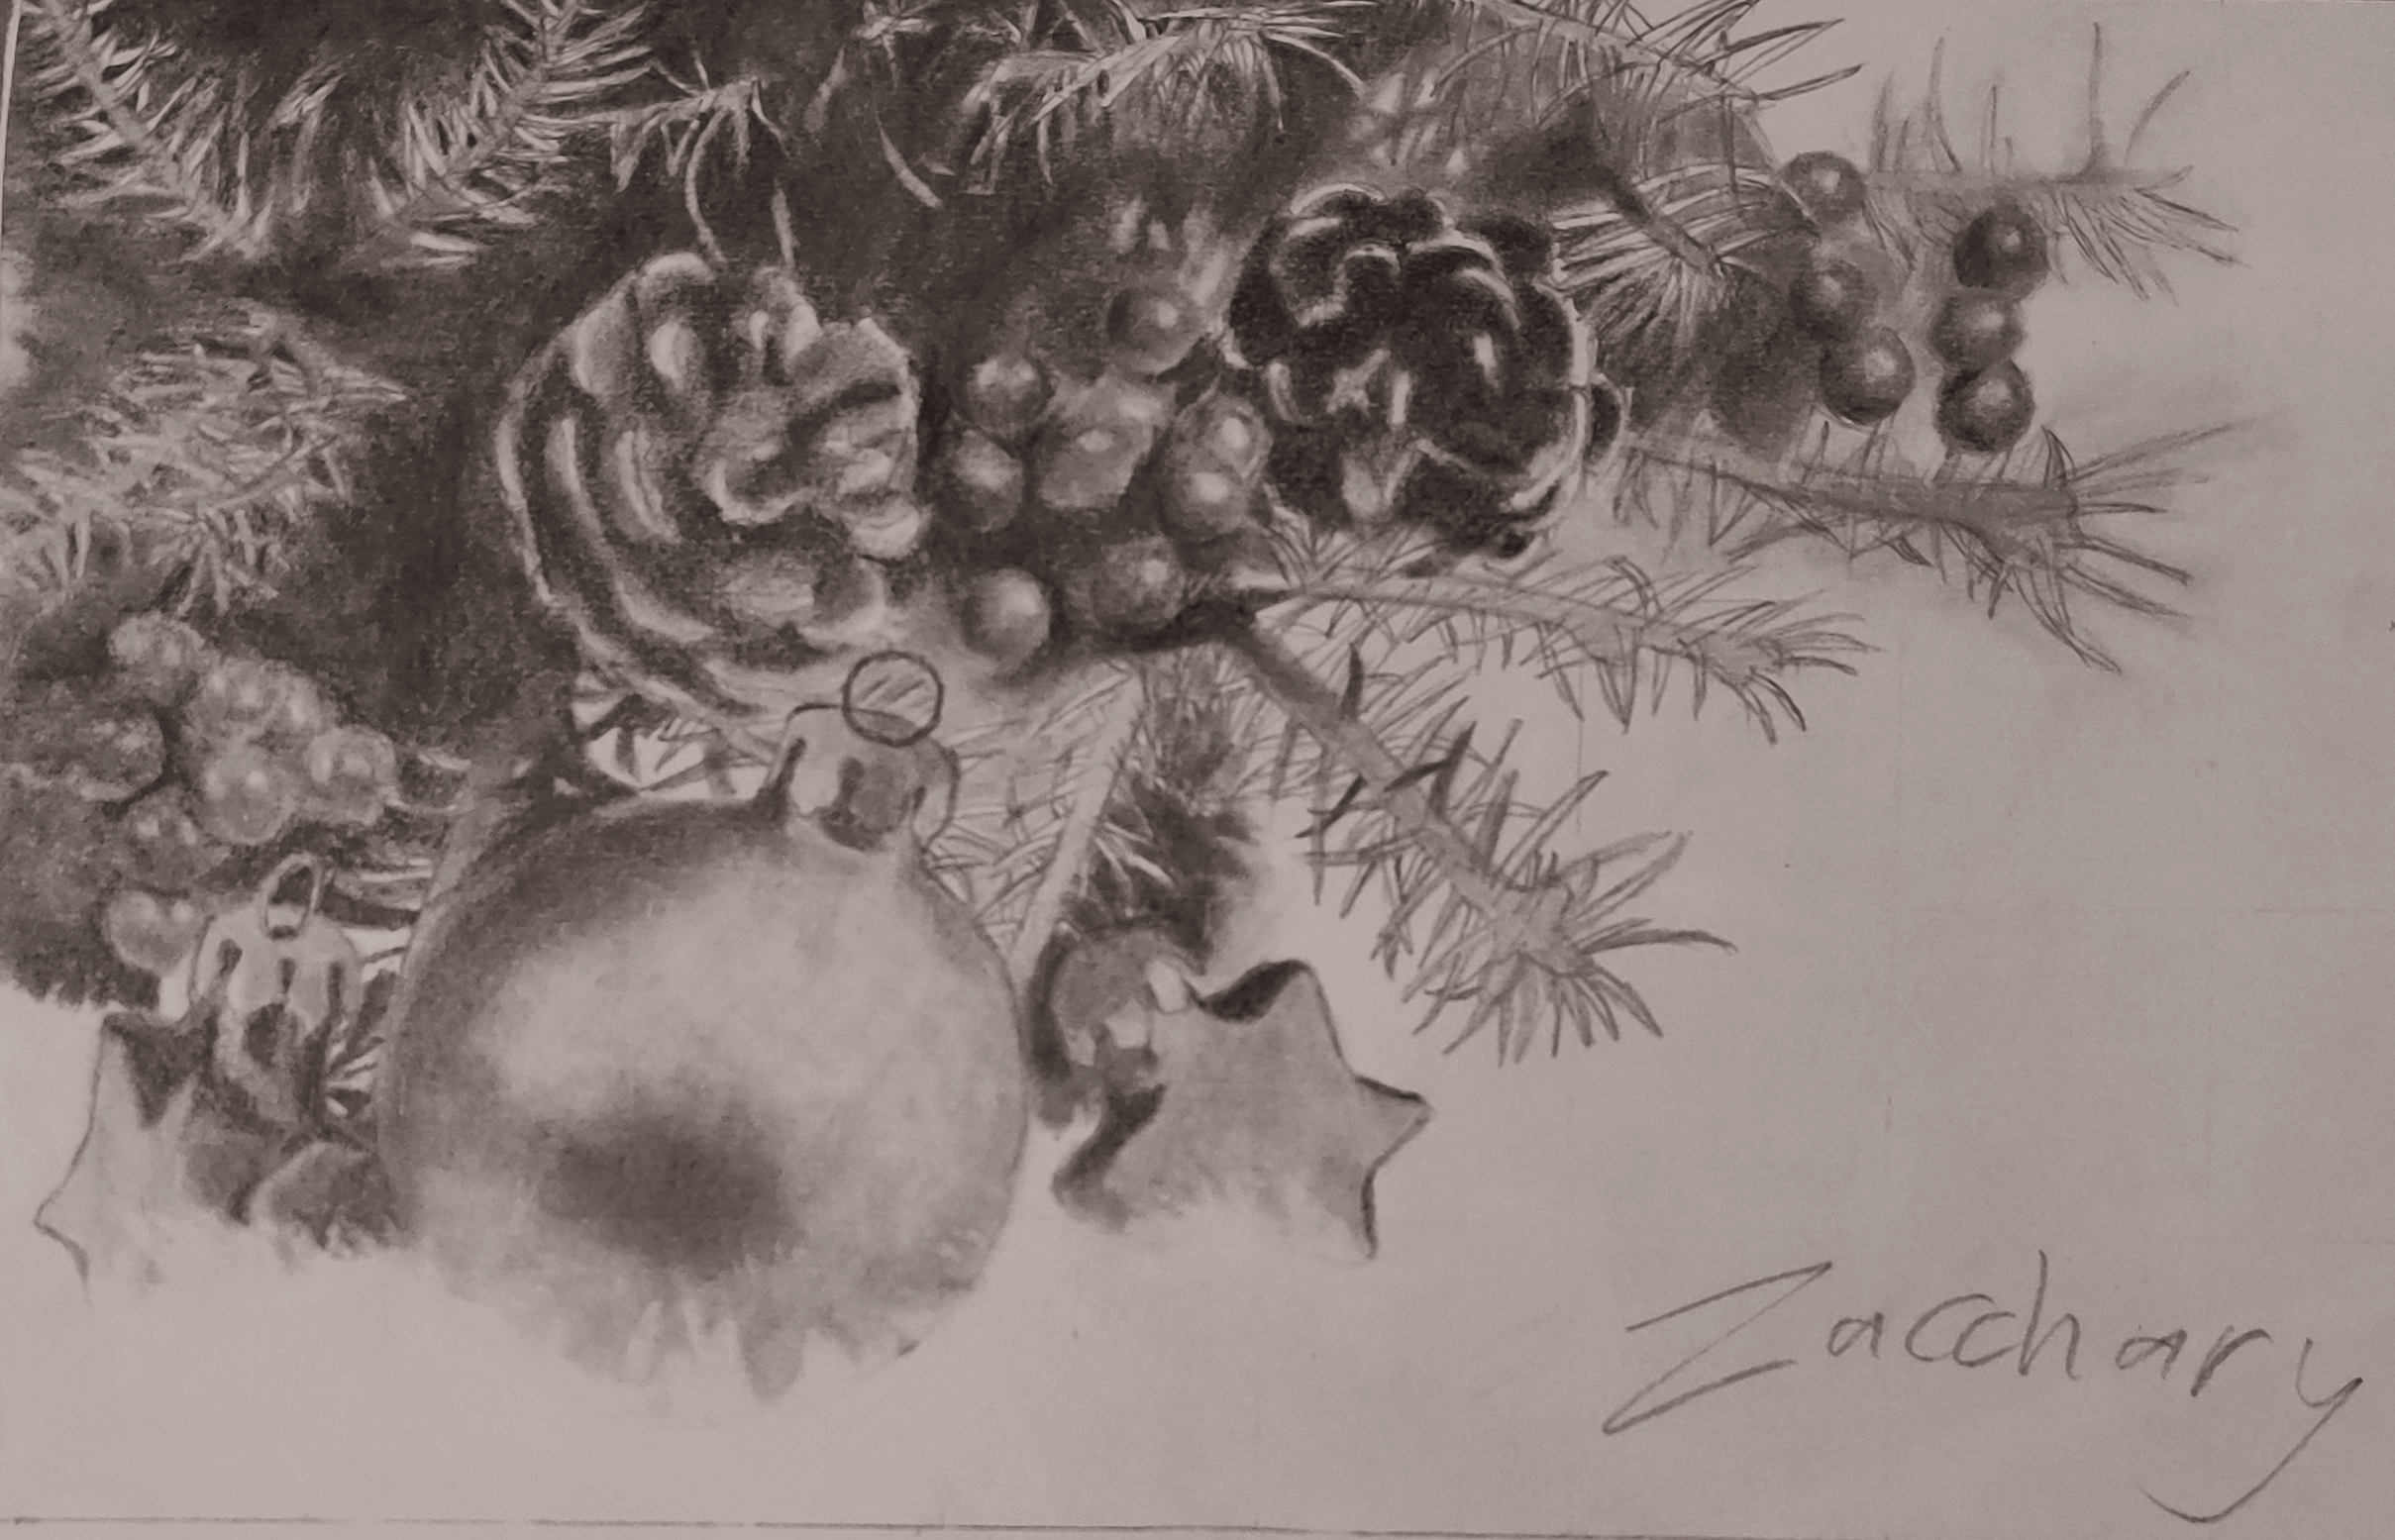 A value drawing of a small Christmas scene.